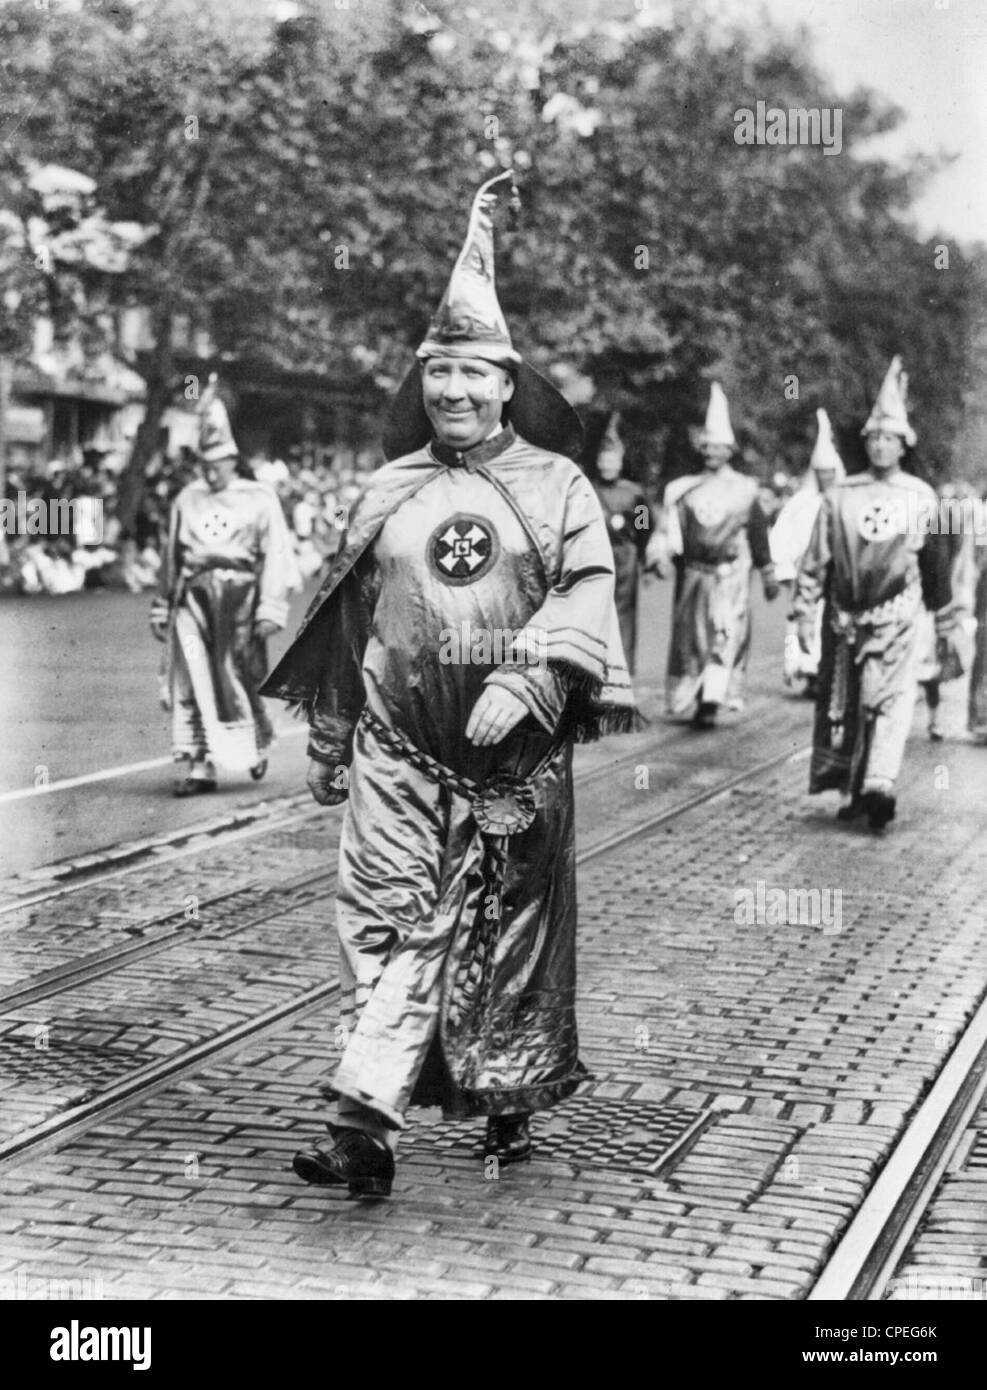 Dr. H.W. Evans, Imperial Wizard of the Ku Klux Klan, leading his KKK parade held in Washington, D.C., September 1926 Stock Photo